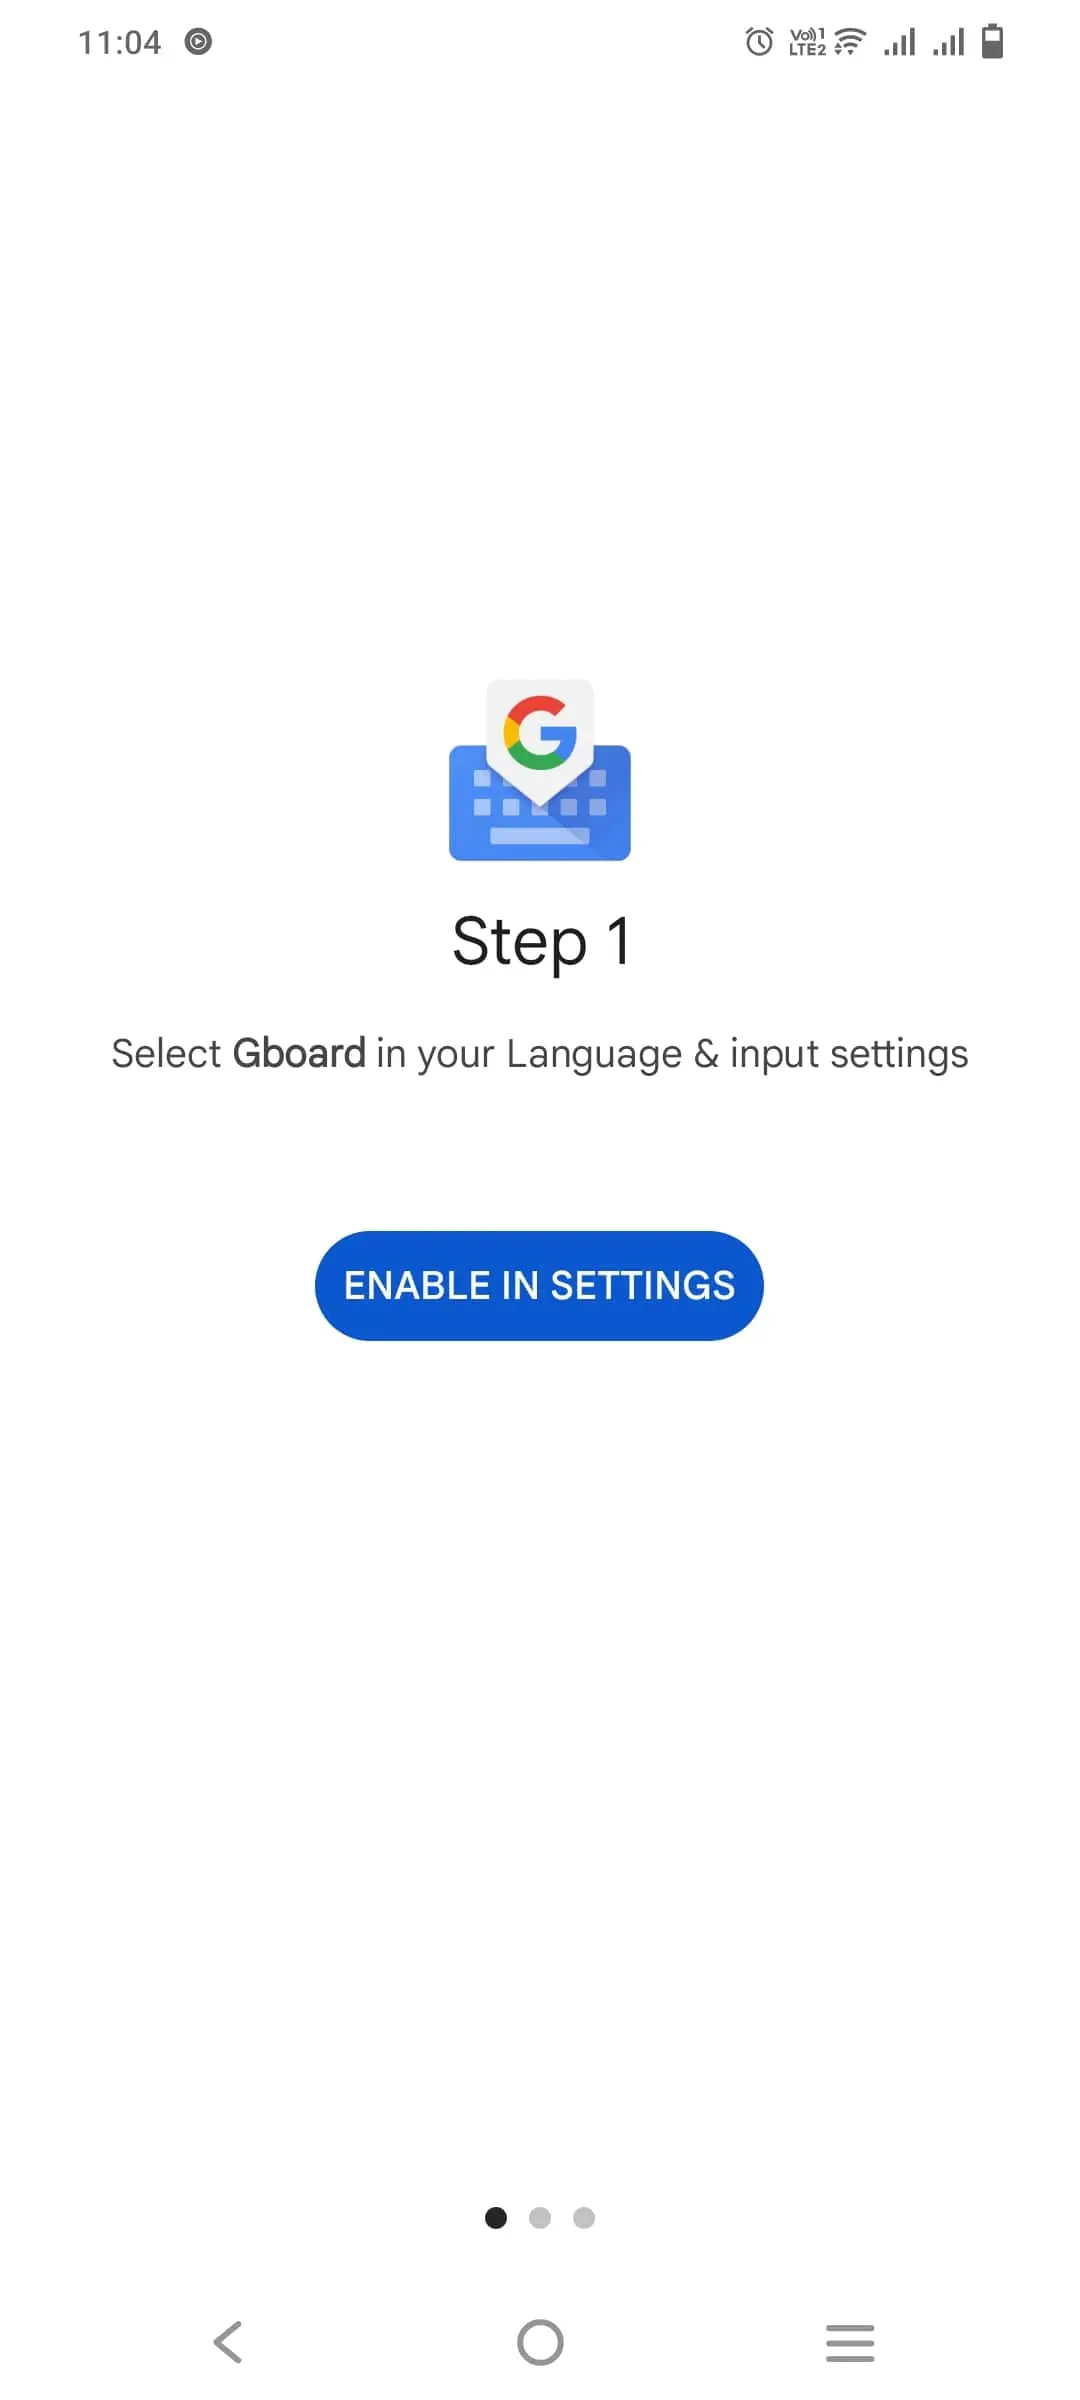 Enable Gboard app for typing in mobile